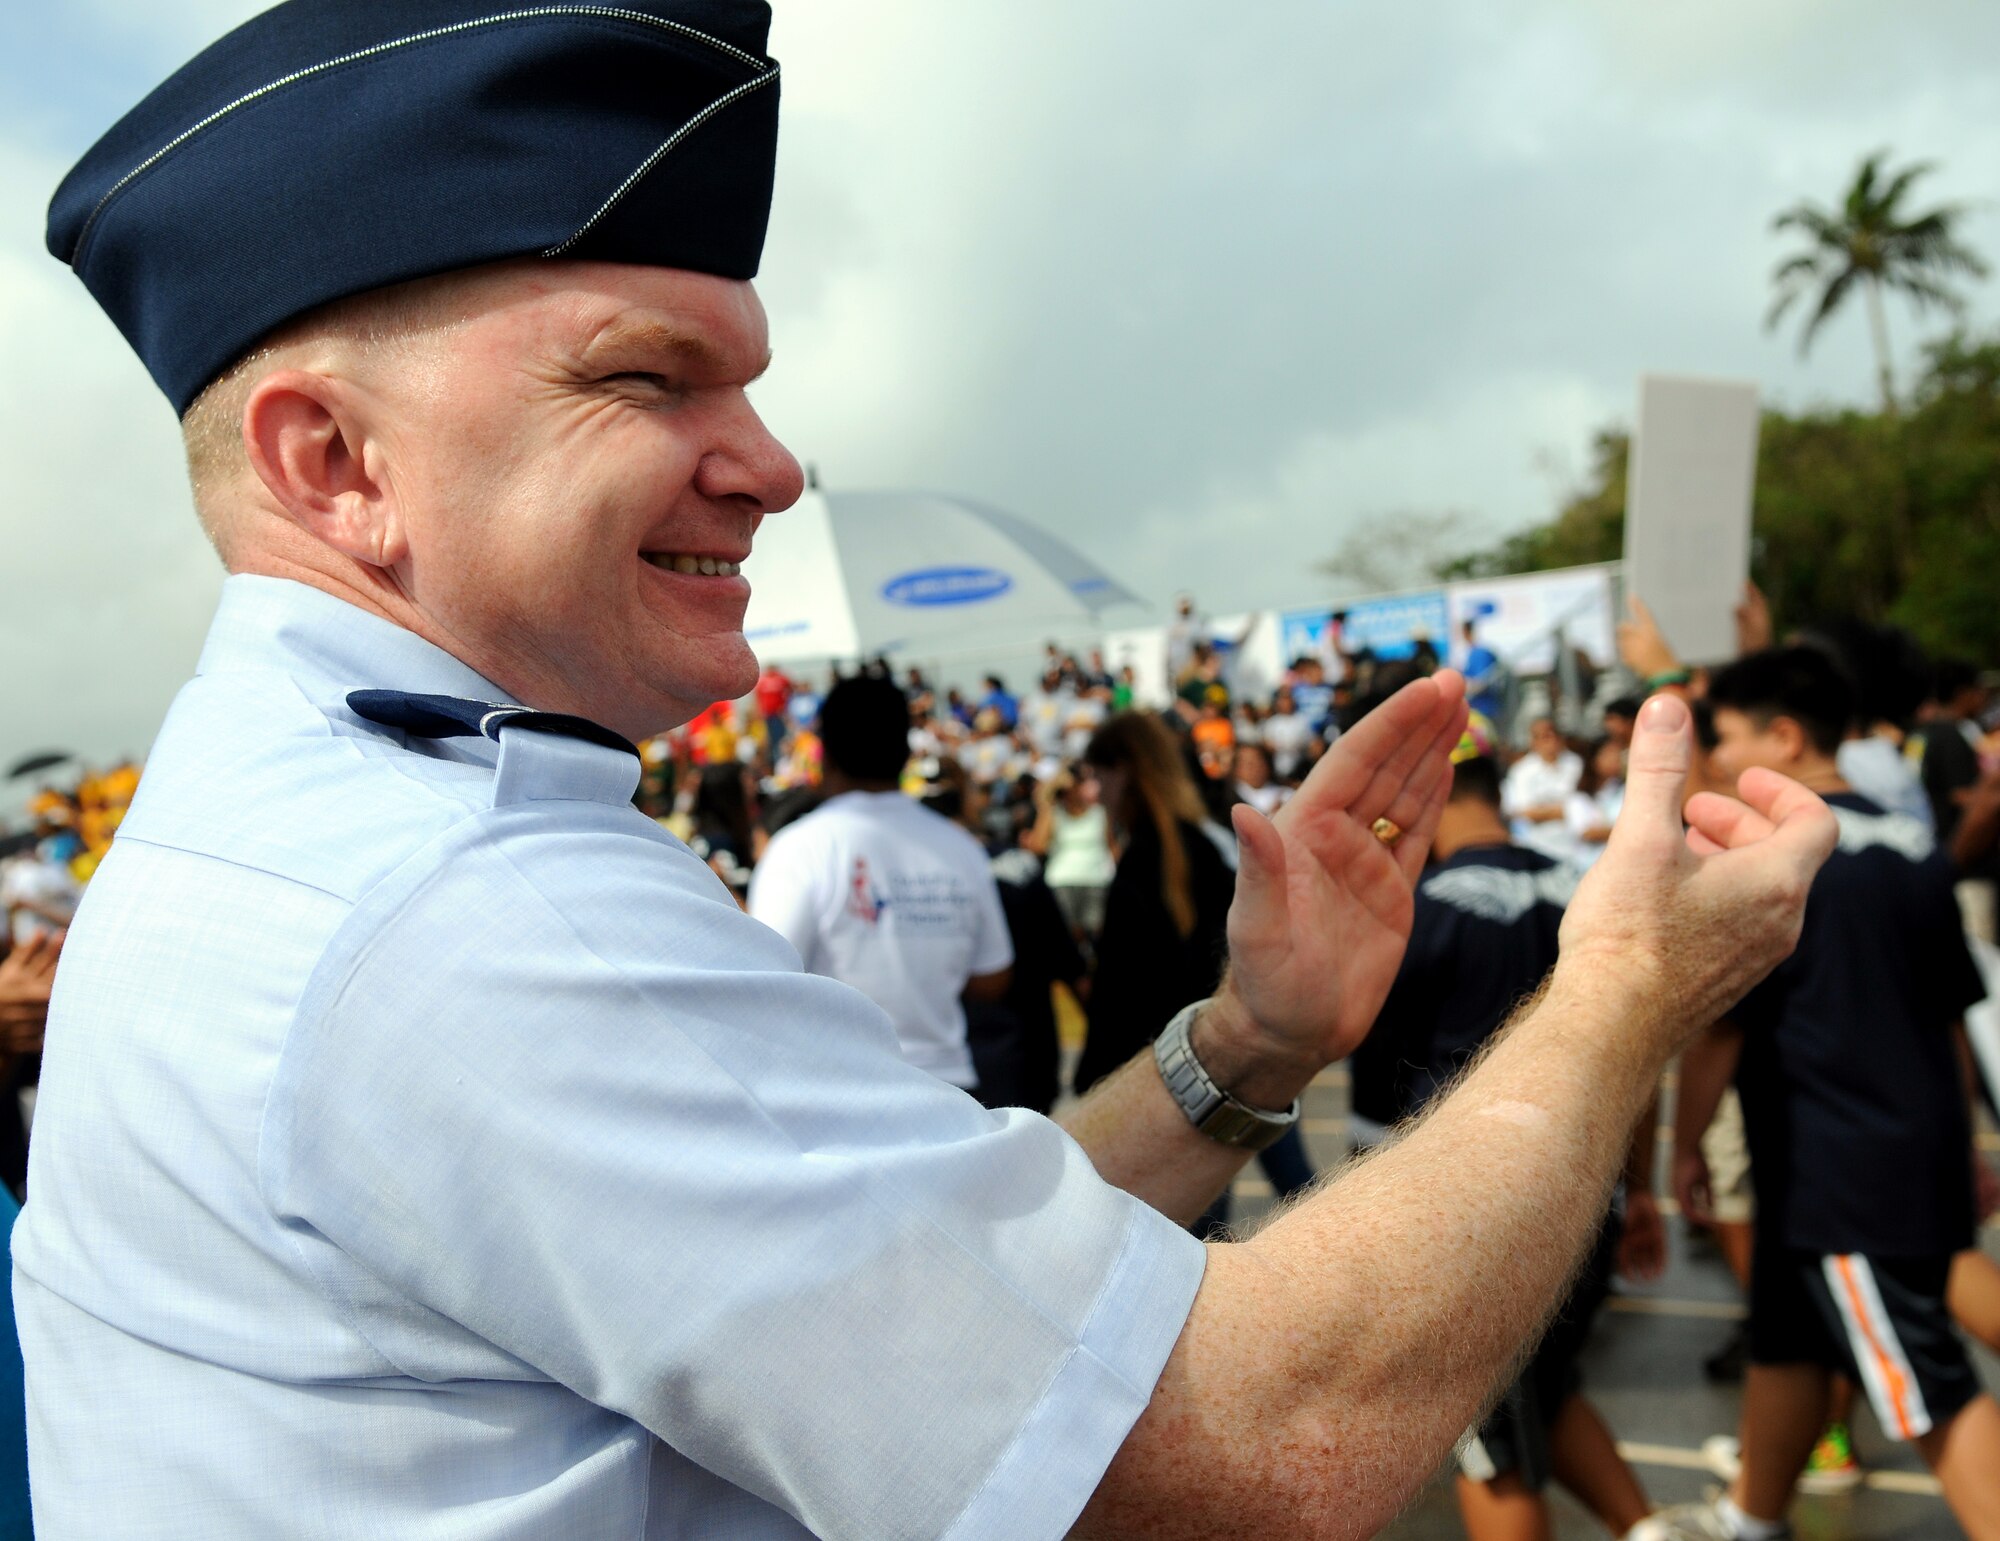 ANDERSEN AIR FORCE BASE, Guam - Andersen's 36th Mission Support Group Commander, Col. Mark Talley, cheers on the Olympians as they parade around the track during the opening ceremony for the 33rd annual track and field Special Olympics at Okkodo High School in Dededo, Guam March 14. Both Air Force and Navy alike pulled together to volunteer for the event. (U.S. Air Force photo by Airman 1st Class Courtney Witt)

